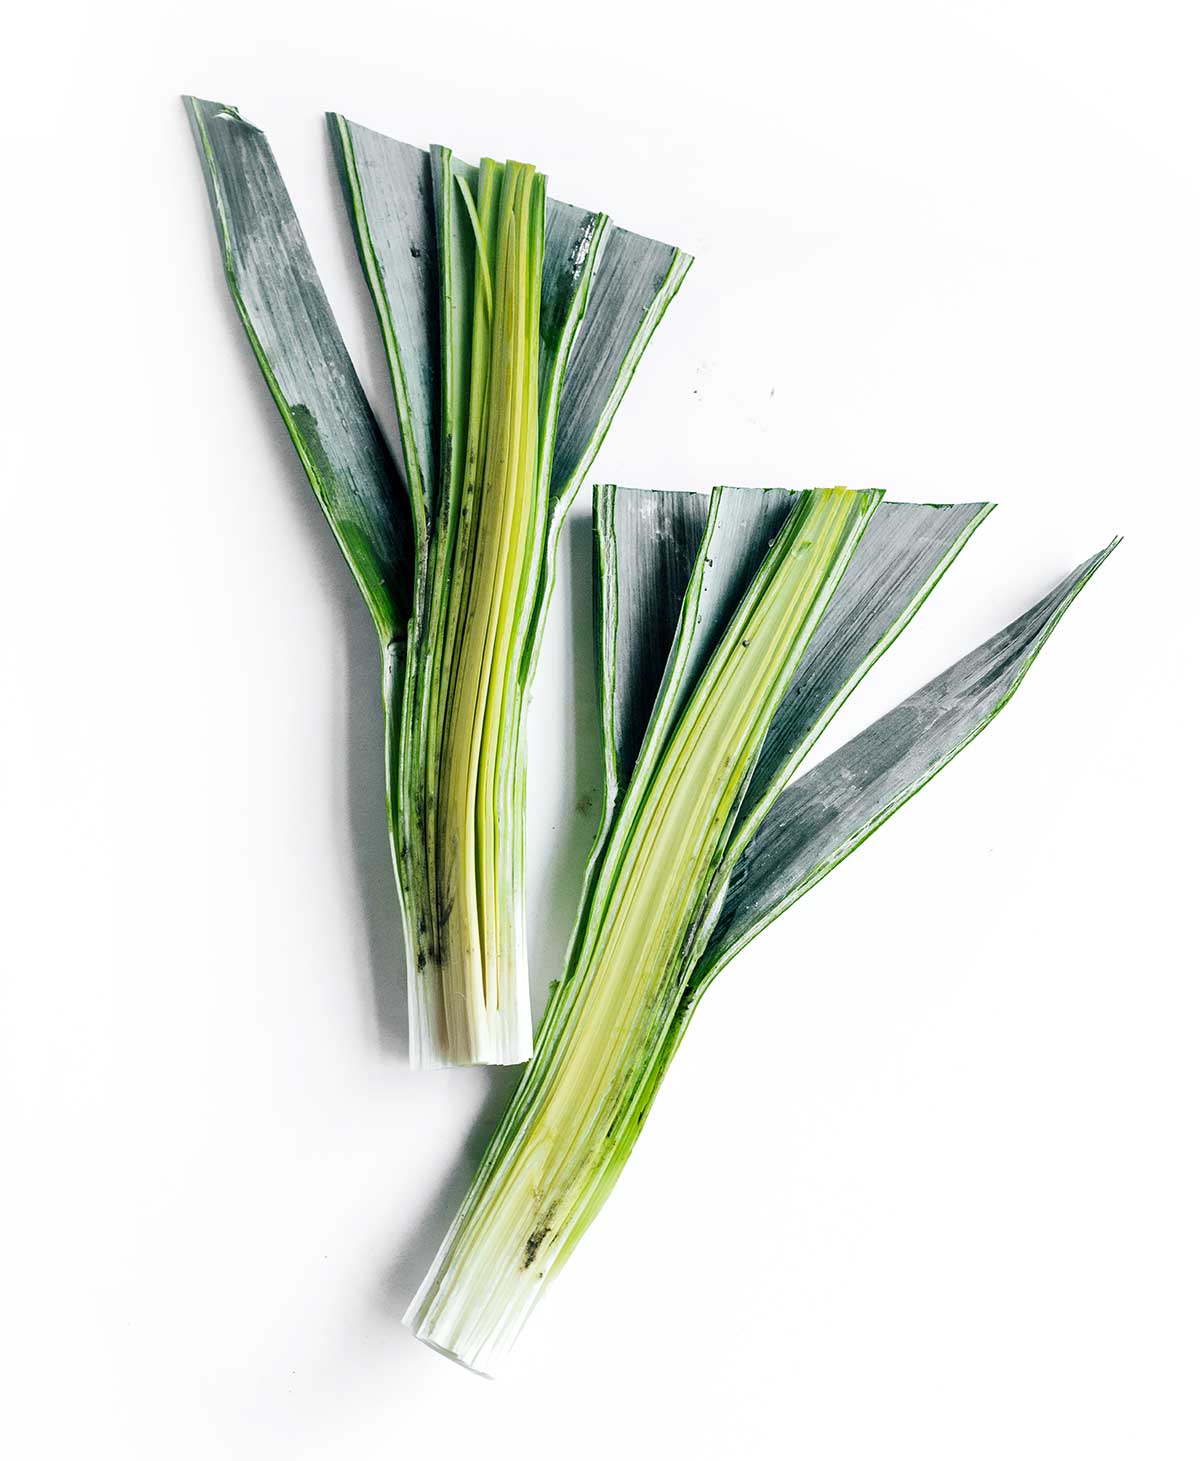 Two leek halves side by side on a white background, insides facing up